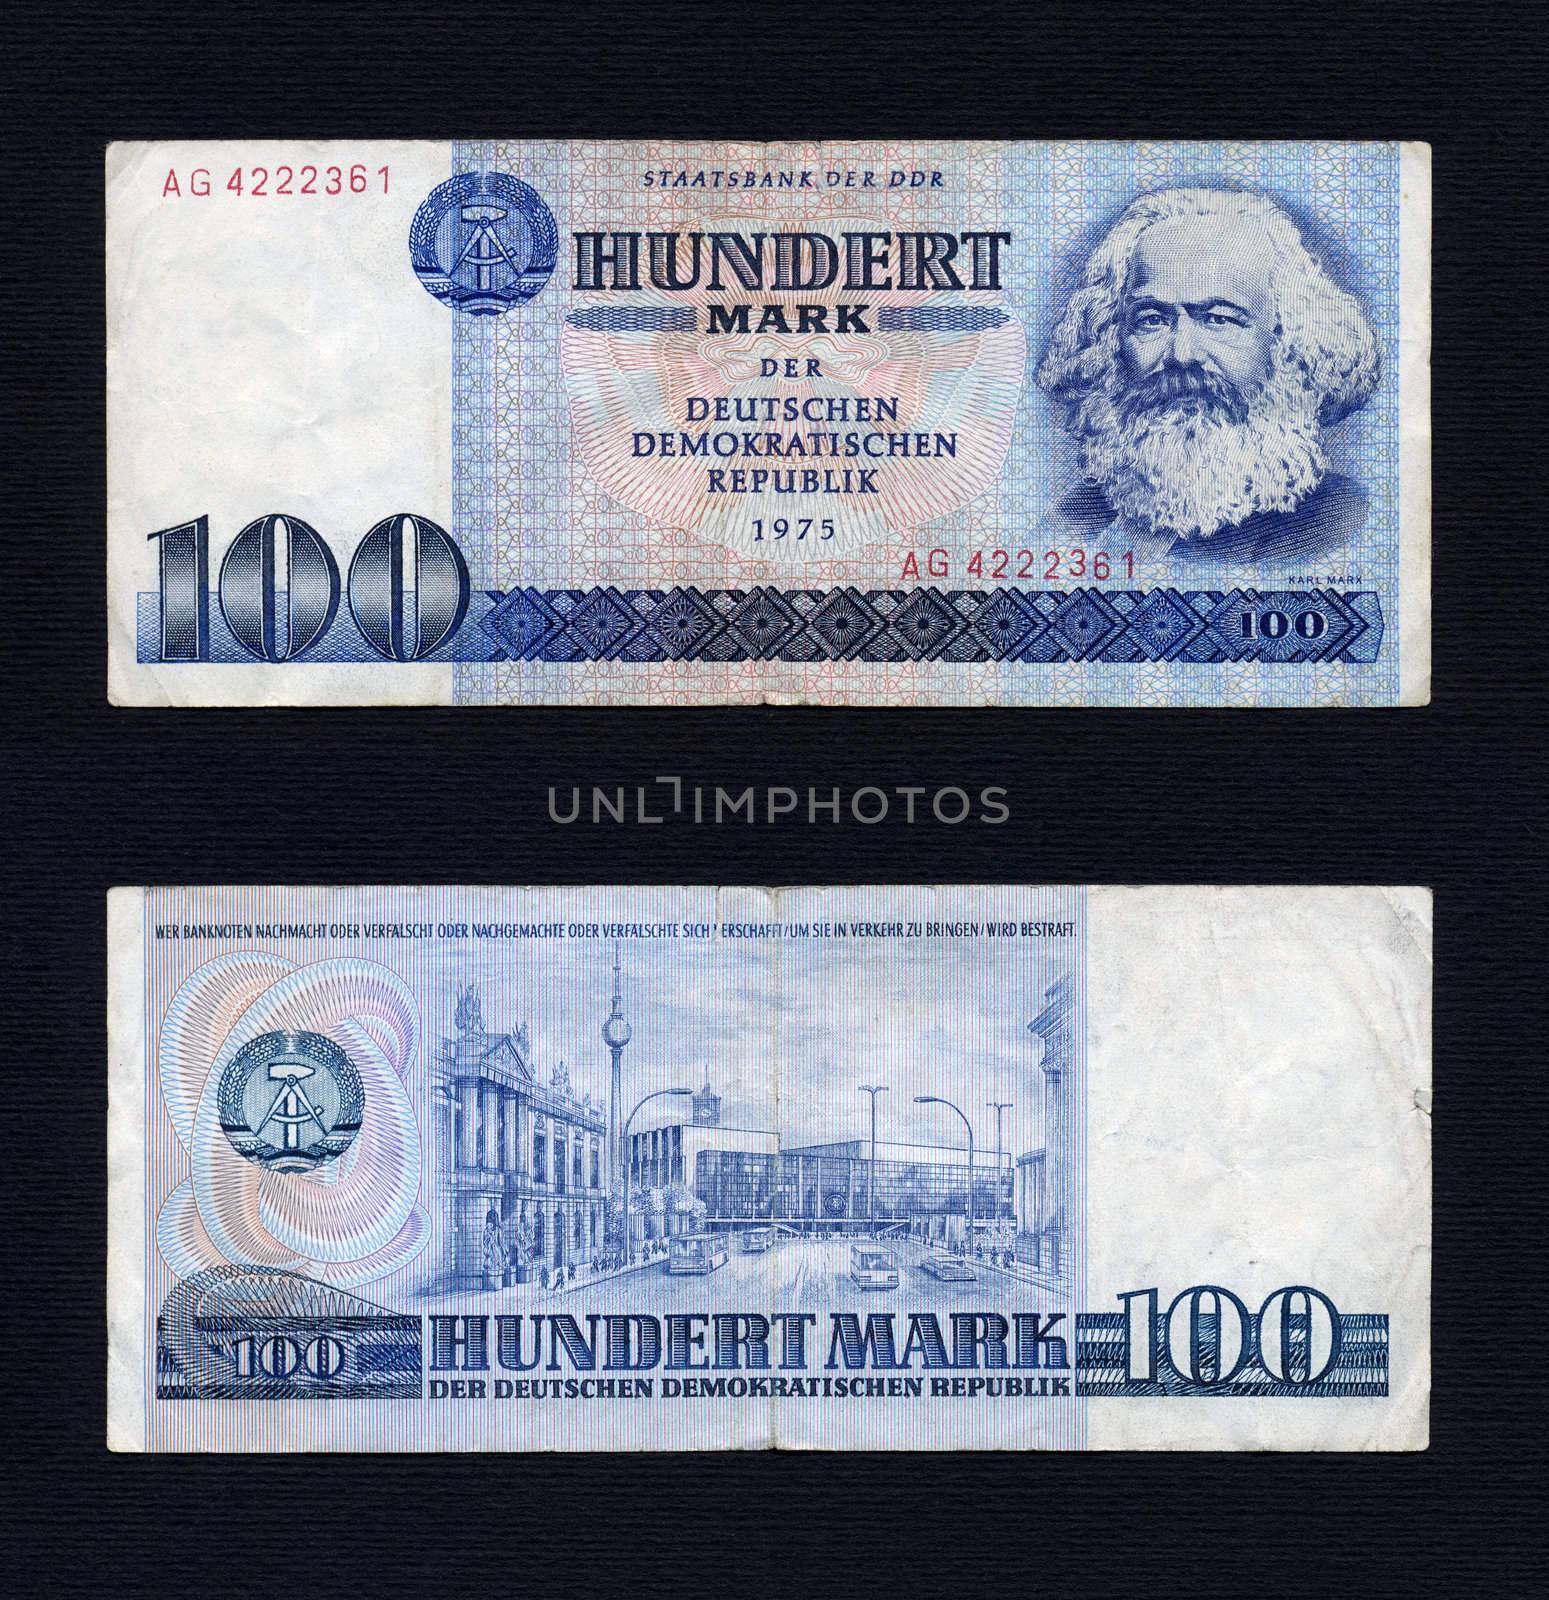 DDR banknote by claudiodivizia